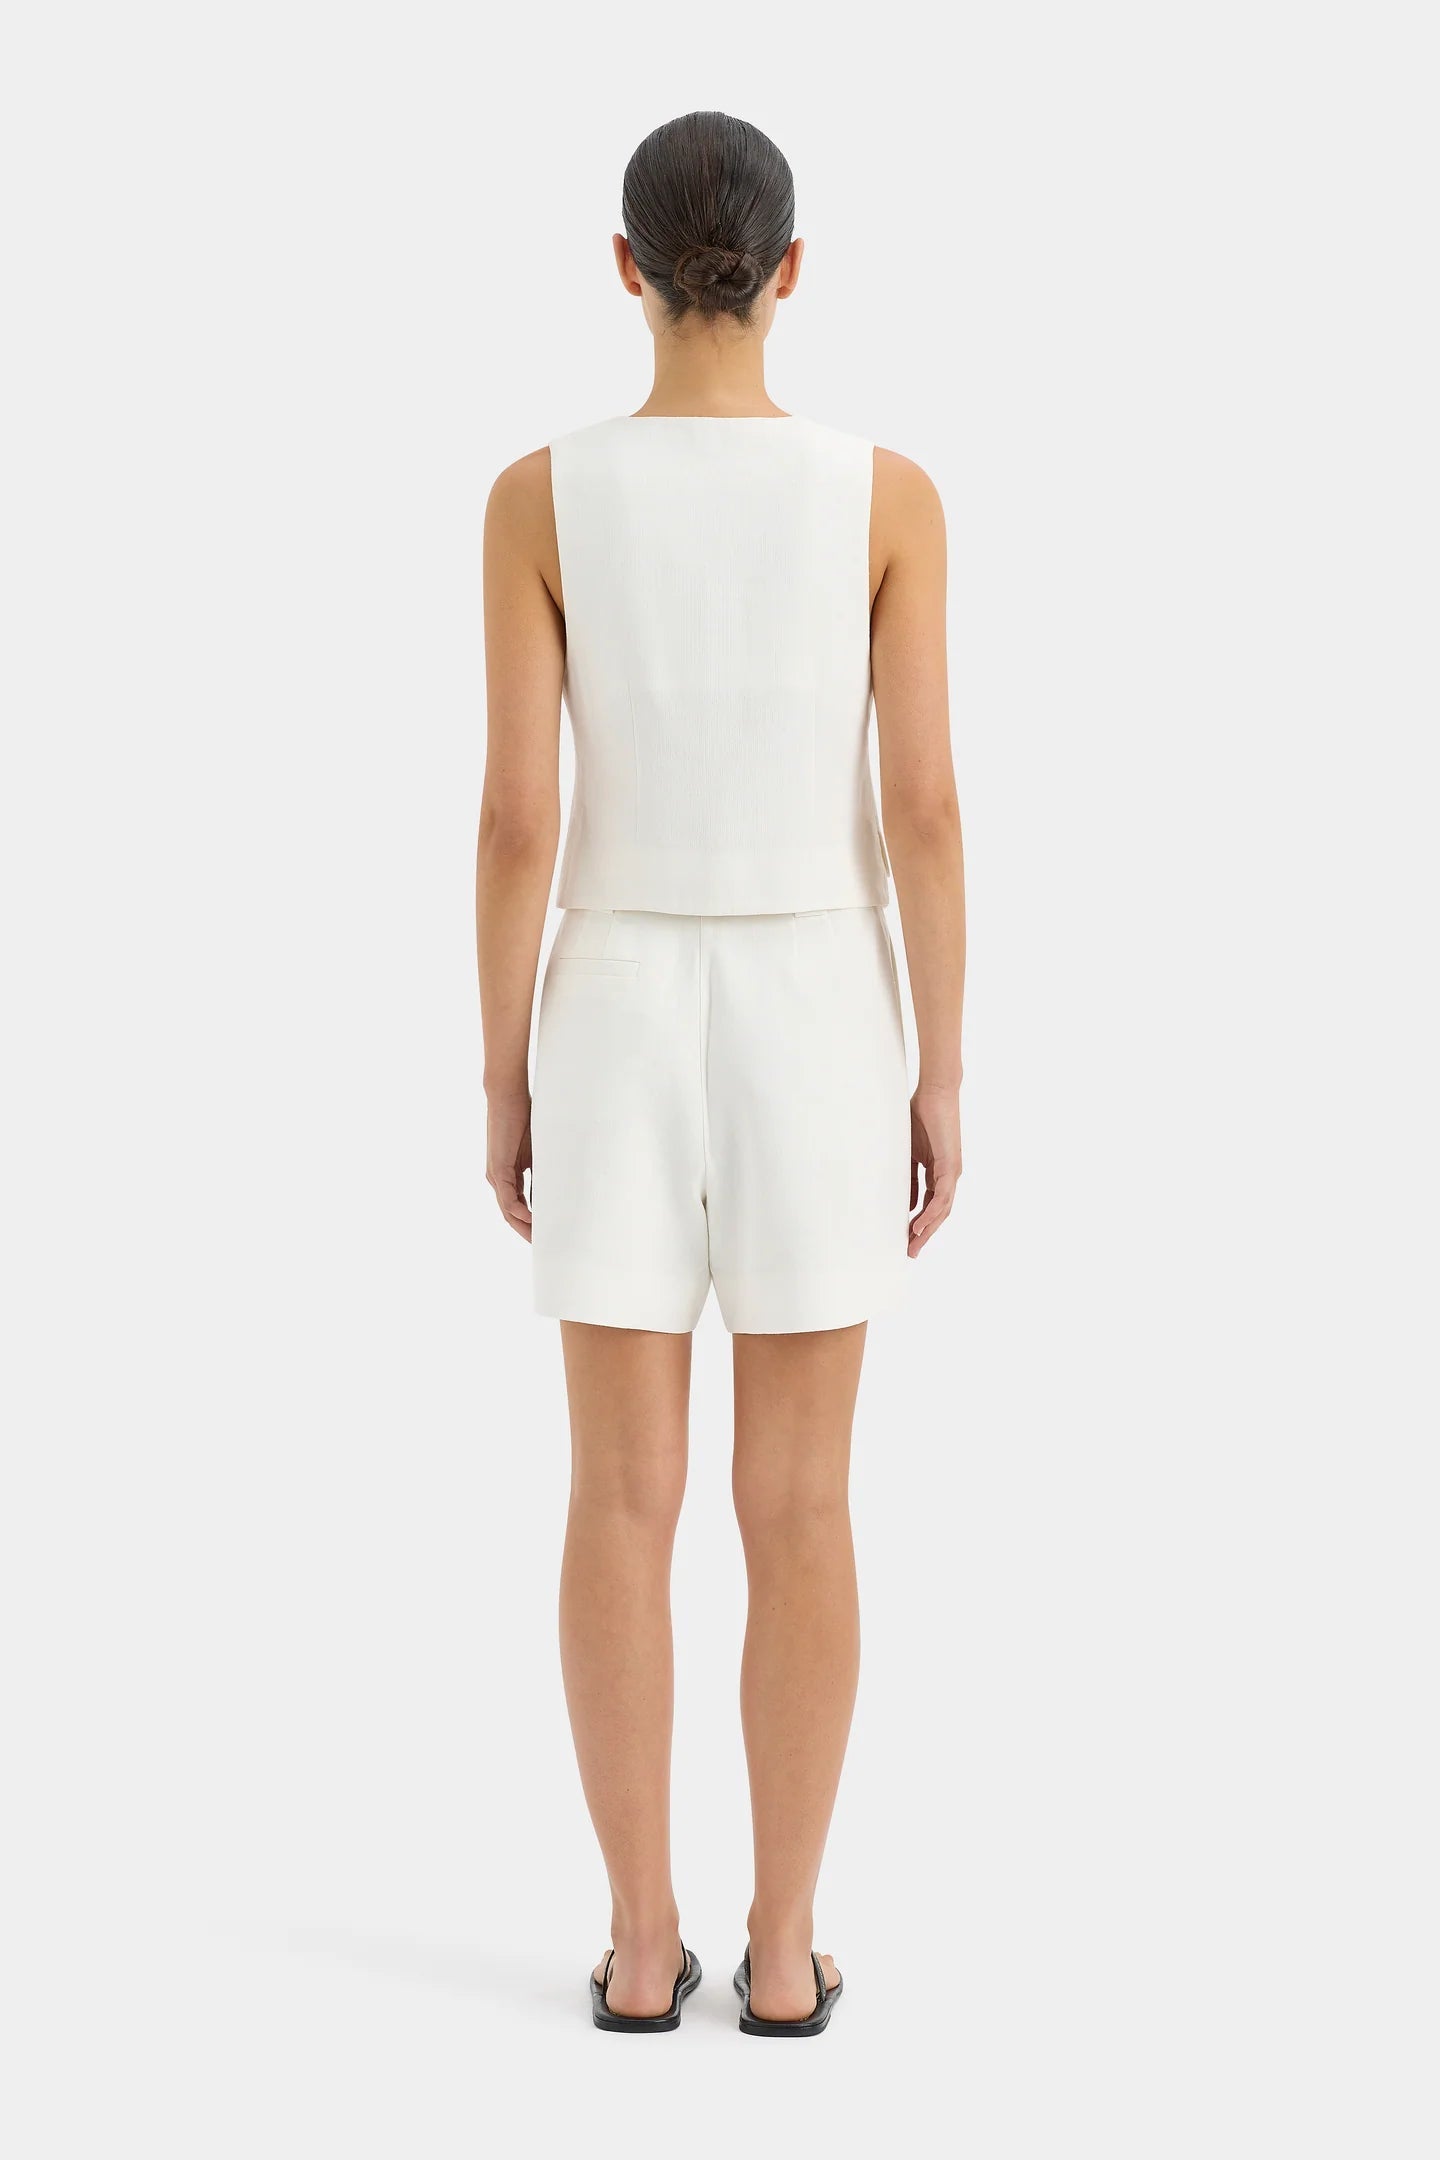 CLEMENCE TAILORED SHORT-IVORY Shorts SIR. 